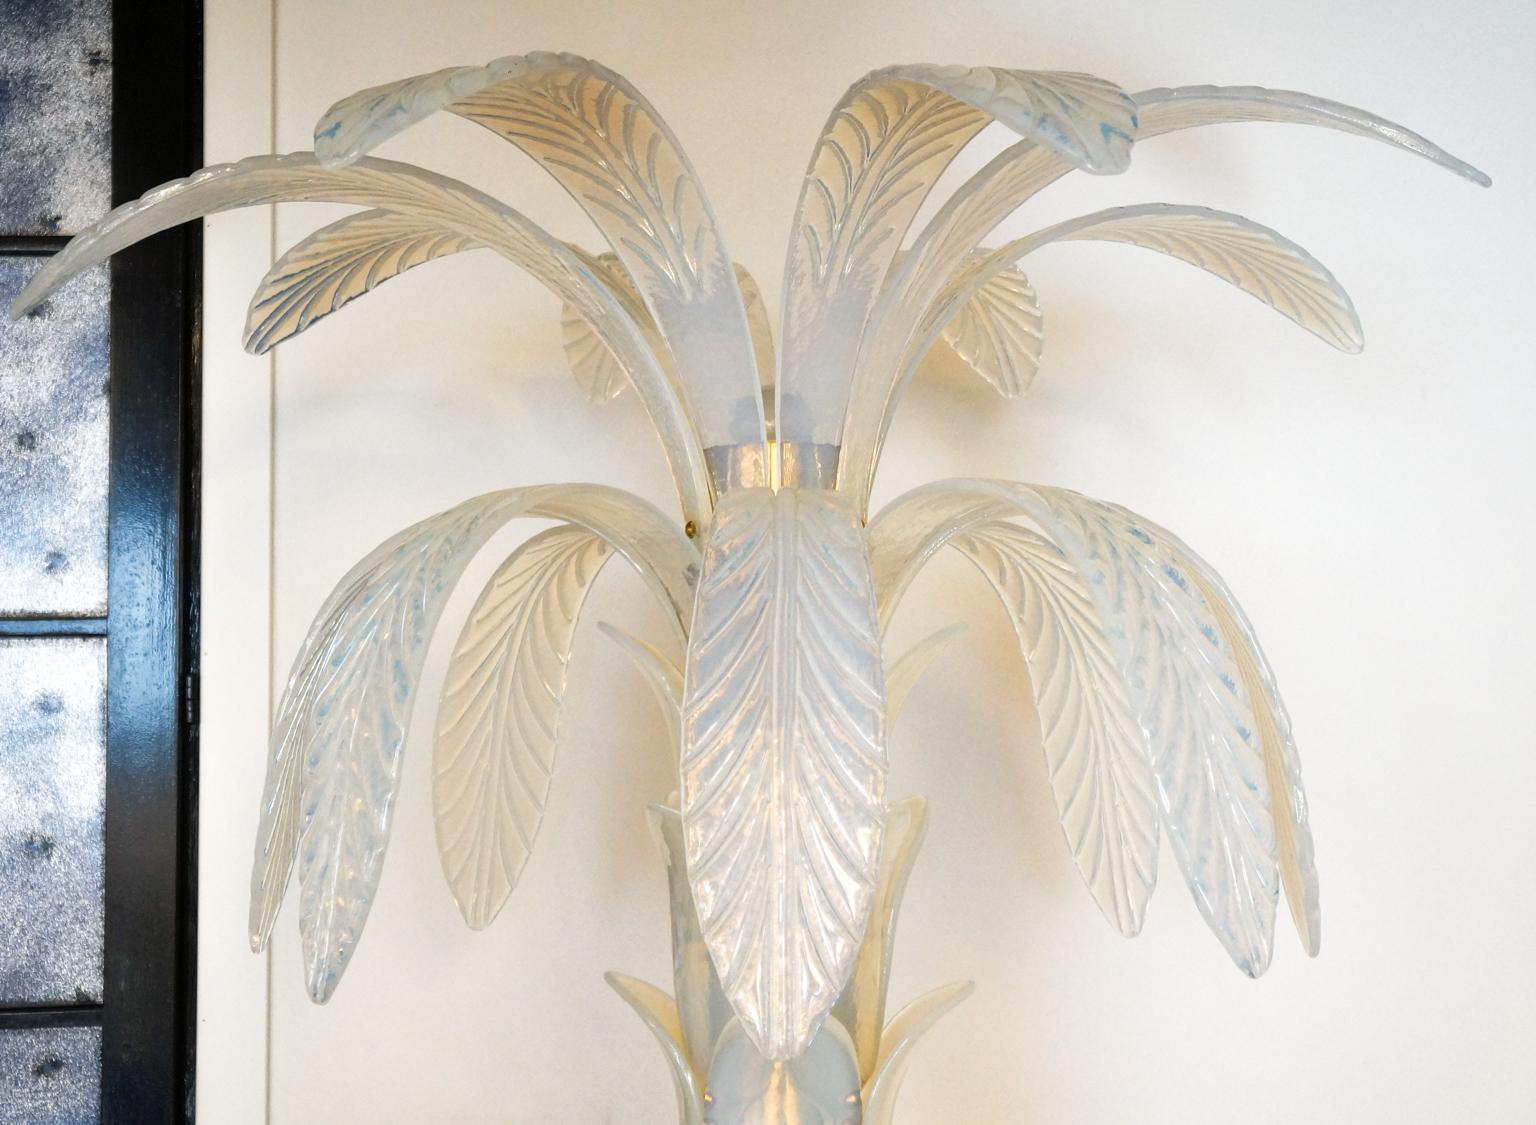 Italian Attributed to Barovier, Opaline Palm Two Murano Glass Floor Lamps, 1990s For Sale